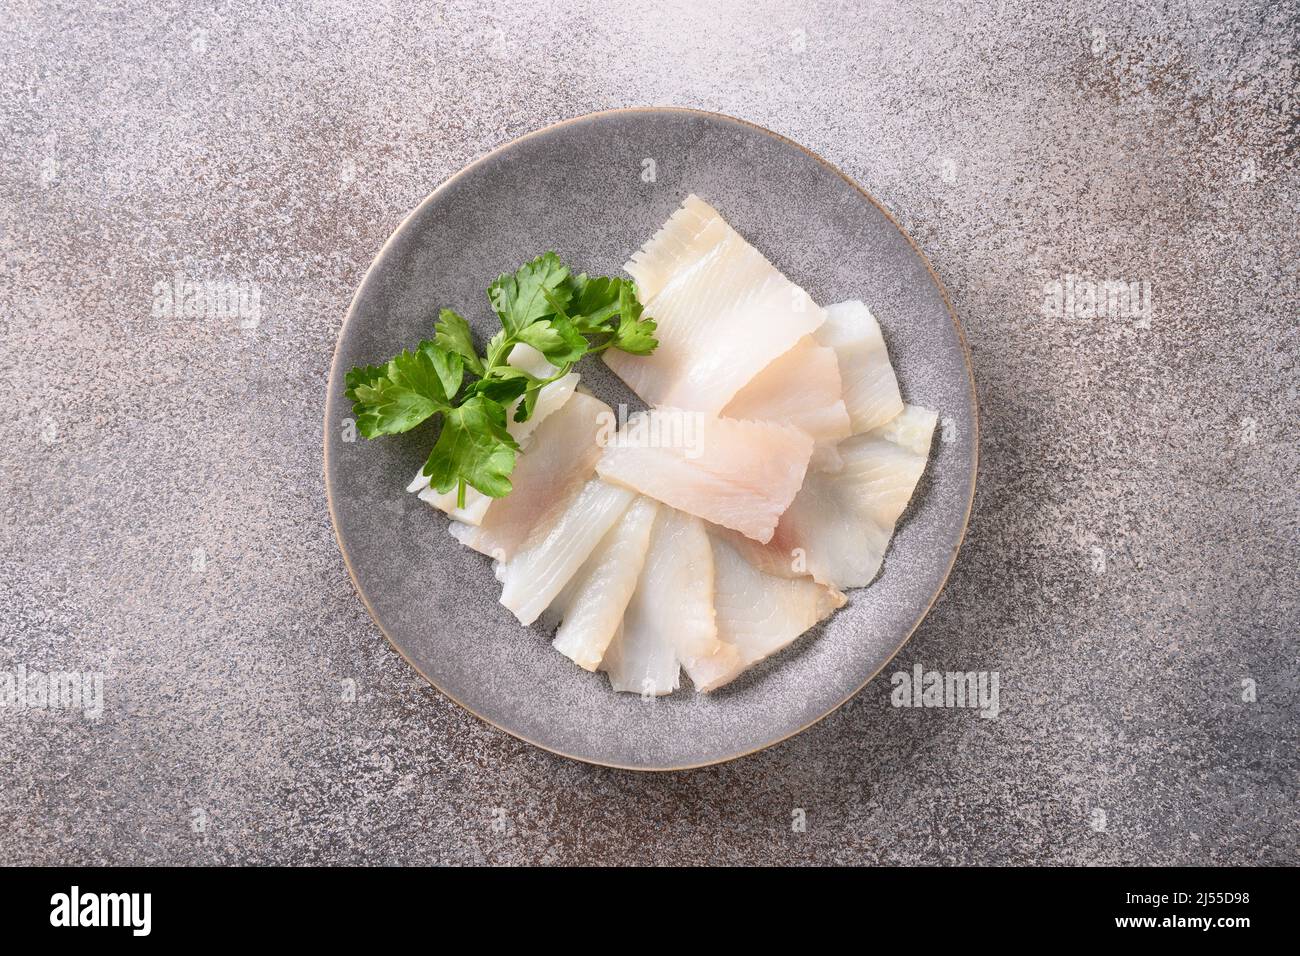 Delicious smoked halibut slices served in white plate isolated on gray background. Top view. Healthy omega 3 unsaturated fats. Stock Photo